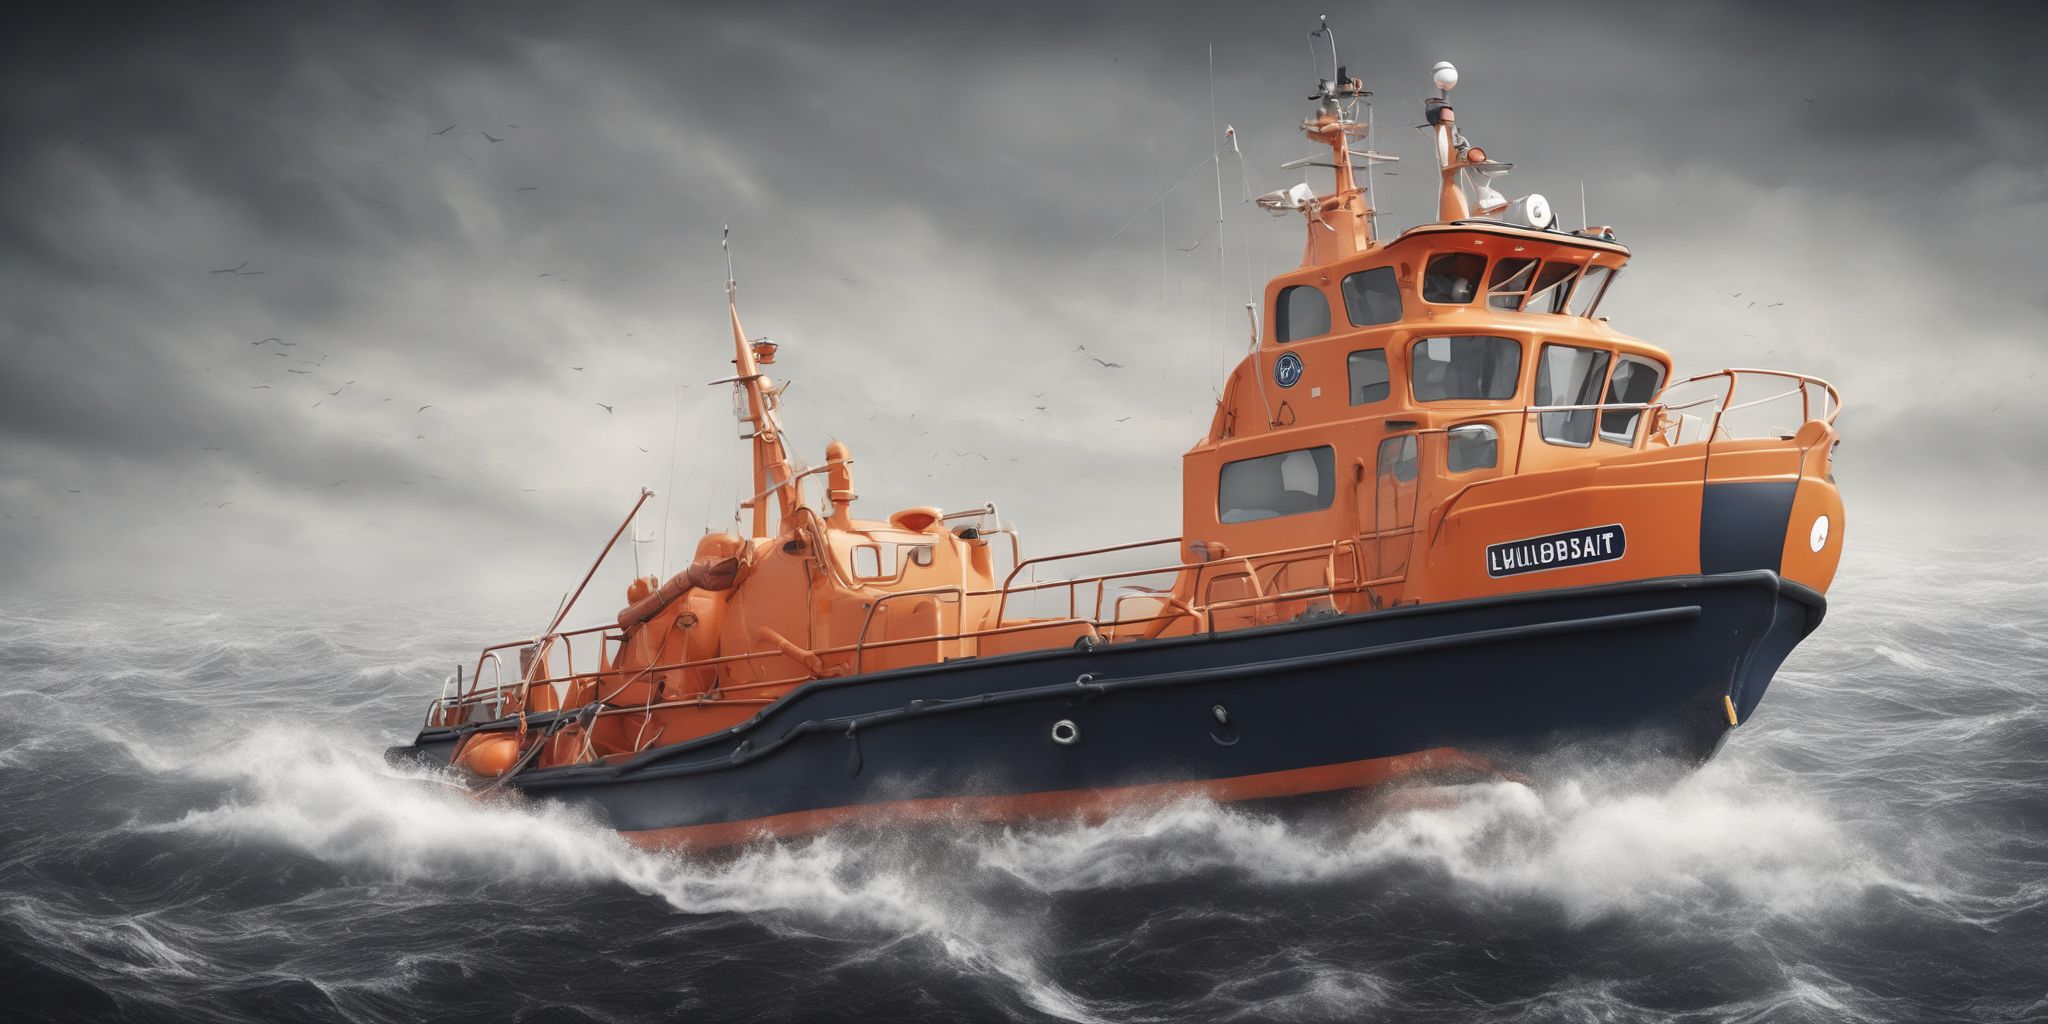 Lifeboat  in realistic, photographic style